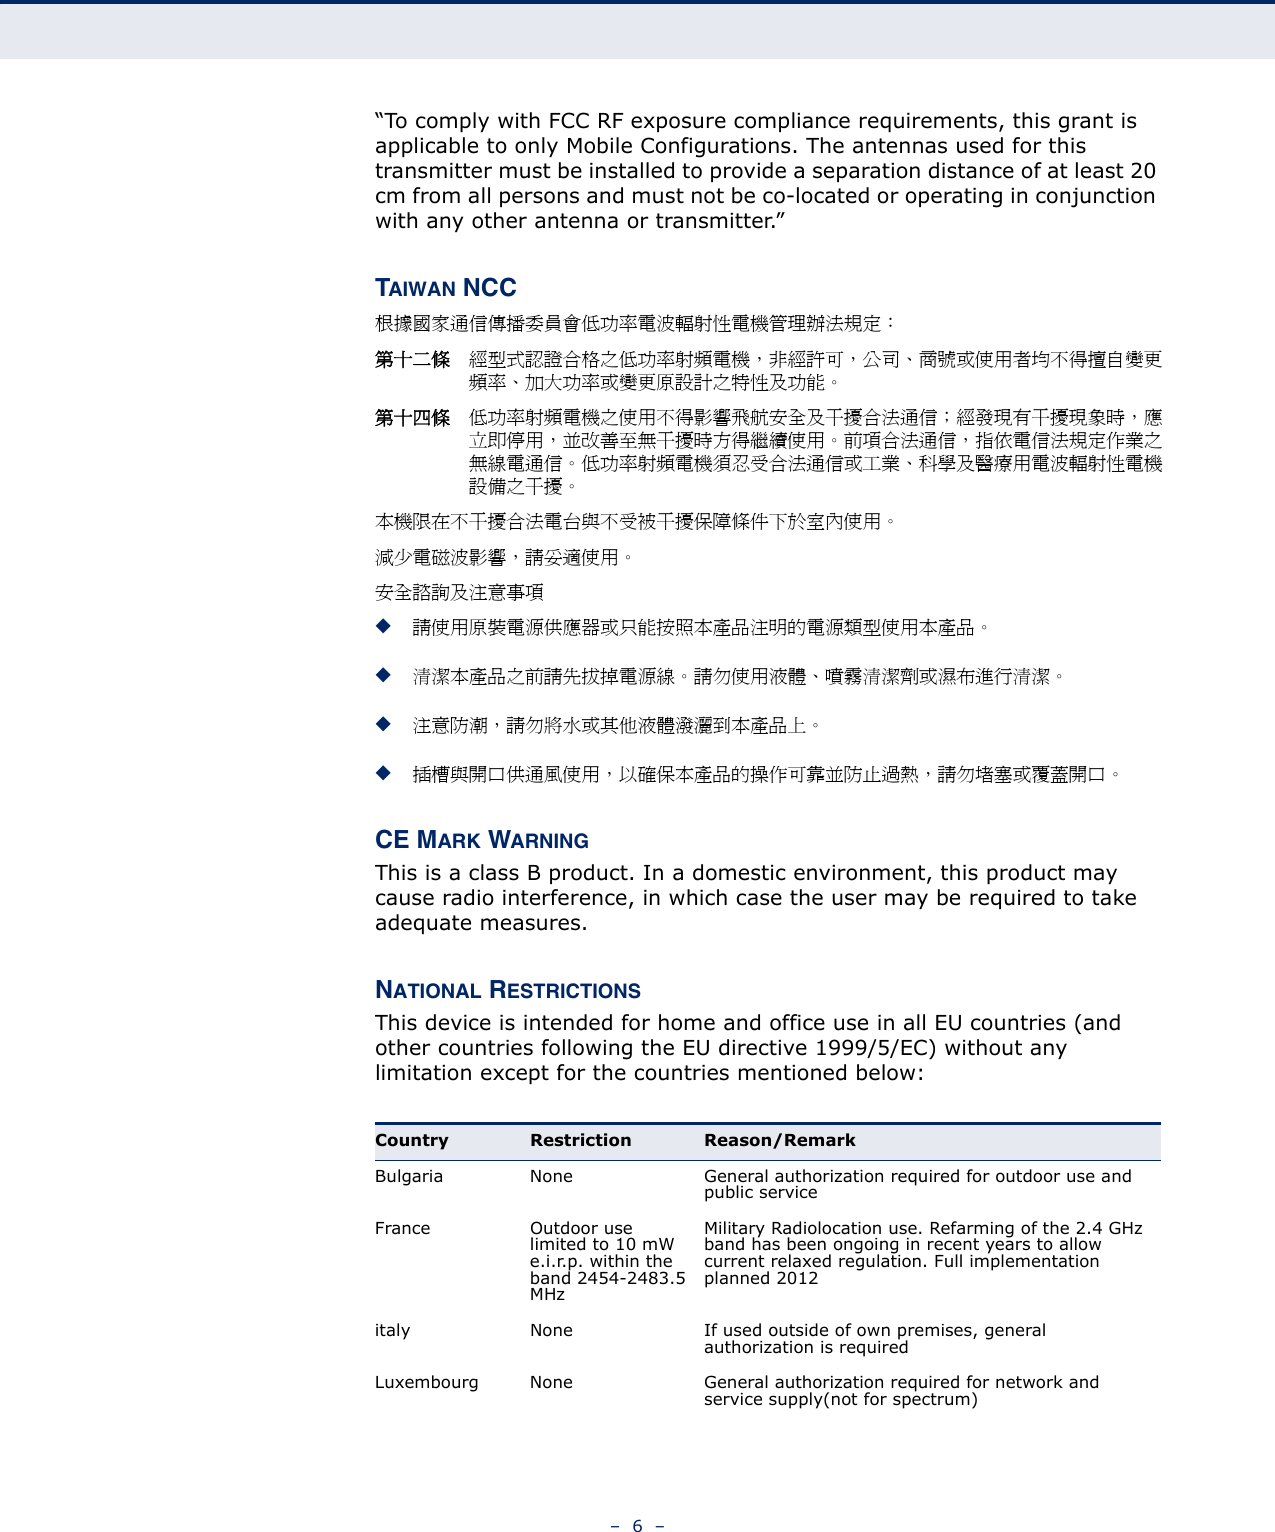 –  6  –“To comply with FCC RF exposure compliance requirements, this grant is applicable to only Mobile Configurations. The antennas used for this transmitter must be installed to provide a separation distance of at least 20 cm from all persons and must not be co-located or operating in conjunction with any other antenna or transmitter.”TAIWAN NCC根據國家通信傳播委員會低功率電波輻射性電機管理辦法規定： 第十二條 經型式認證合格之低功率射頻電機，非經許可，公司、商號或使用者均不得擅自變更頻率、加大功率或變更原設計之特性及功能。第十四條 低功率射頻電機之使用不得影響飛航安全及干擾合法通信；經發現有干擾現象時，應立即停用，並改善至無干擾時方得繼續使用。前項合法通信，指依電信法規定作業之無線電通信。低功率射頻電機須忍受合法通信或工業、科學及醫療用電波輻射性電機設備之干擾。本機限在不干擾合法電台與不受被干擾保障條件下於室內使用。減少電磁波影響，請妥適使用。安全諮詢及注意事項◆請使用原裝電源供應器或只能按照本產品注明的電源類型使用本產品。◆清潔本產品之前請先拔掉電源線。請勿使用液體、噴霧清潔劑或濕布進行清潔。◆注意防潮，請勿將水或其他液體潑灑到本產品上。 ◆插槽與開口供通風使用，以確保本產品的操作可靠並防止過熱，請勿堵塞或覆蓋開口。CE MARK WARNINGThis is a class B product. In a domestic environment, this product may cause radio interference, in which case the user may be required to take adequate measures.NATIONAL RESTRICTIONSThis device is intended for home and office use in all EU countries (and other countries following the EU directive 1999/5/EC) without any limitation except for the countries mentioned below:Country Restriction Reason/RemarkBulgaria None General authorization required for outdoor use and public serviceFrance Outdoor use limited to 10 mW e.i.r.p. within the band 2454-2483.5 MHzMilitary Radiolocation use. Refarming of the 2.4 GHz band has been ongoing in recent years to allow current relaxed regulation. Full implementation planned 2012italy None If used outside of own premises, general authorization is requiredLuxembourg None General authorization required for network and service supply(not for spectrum)